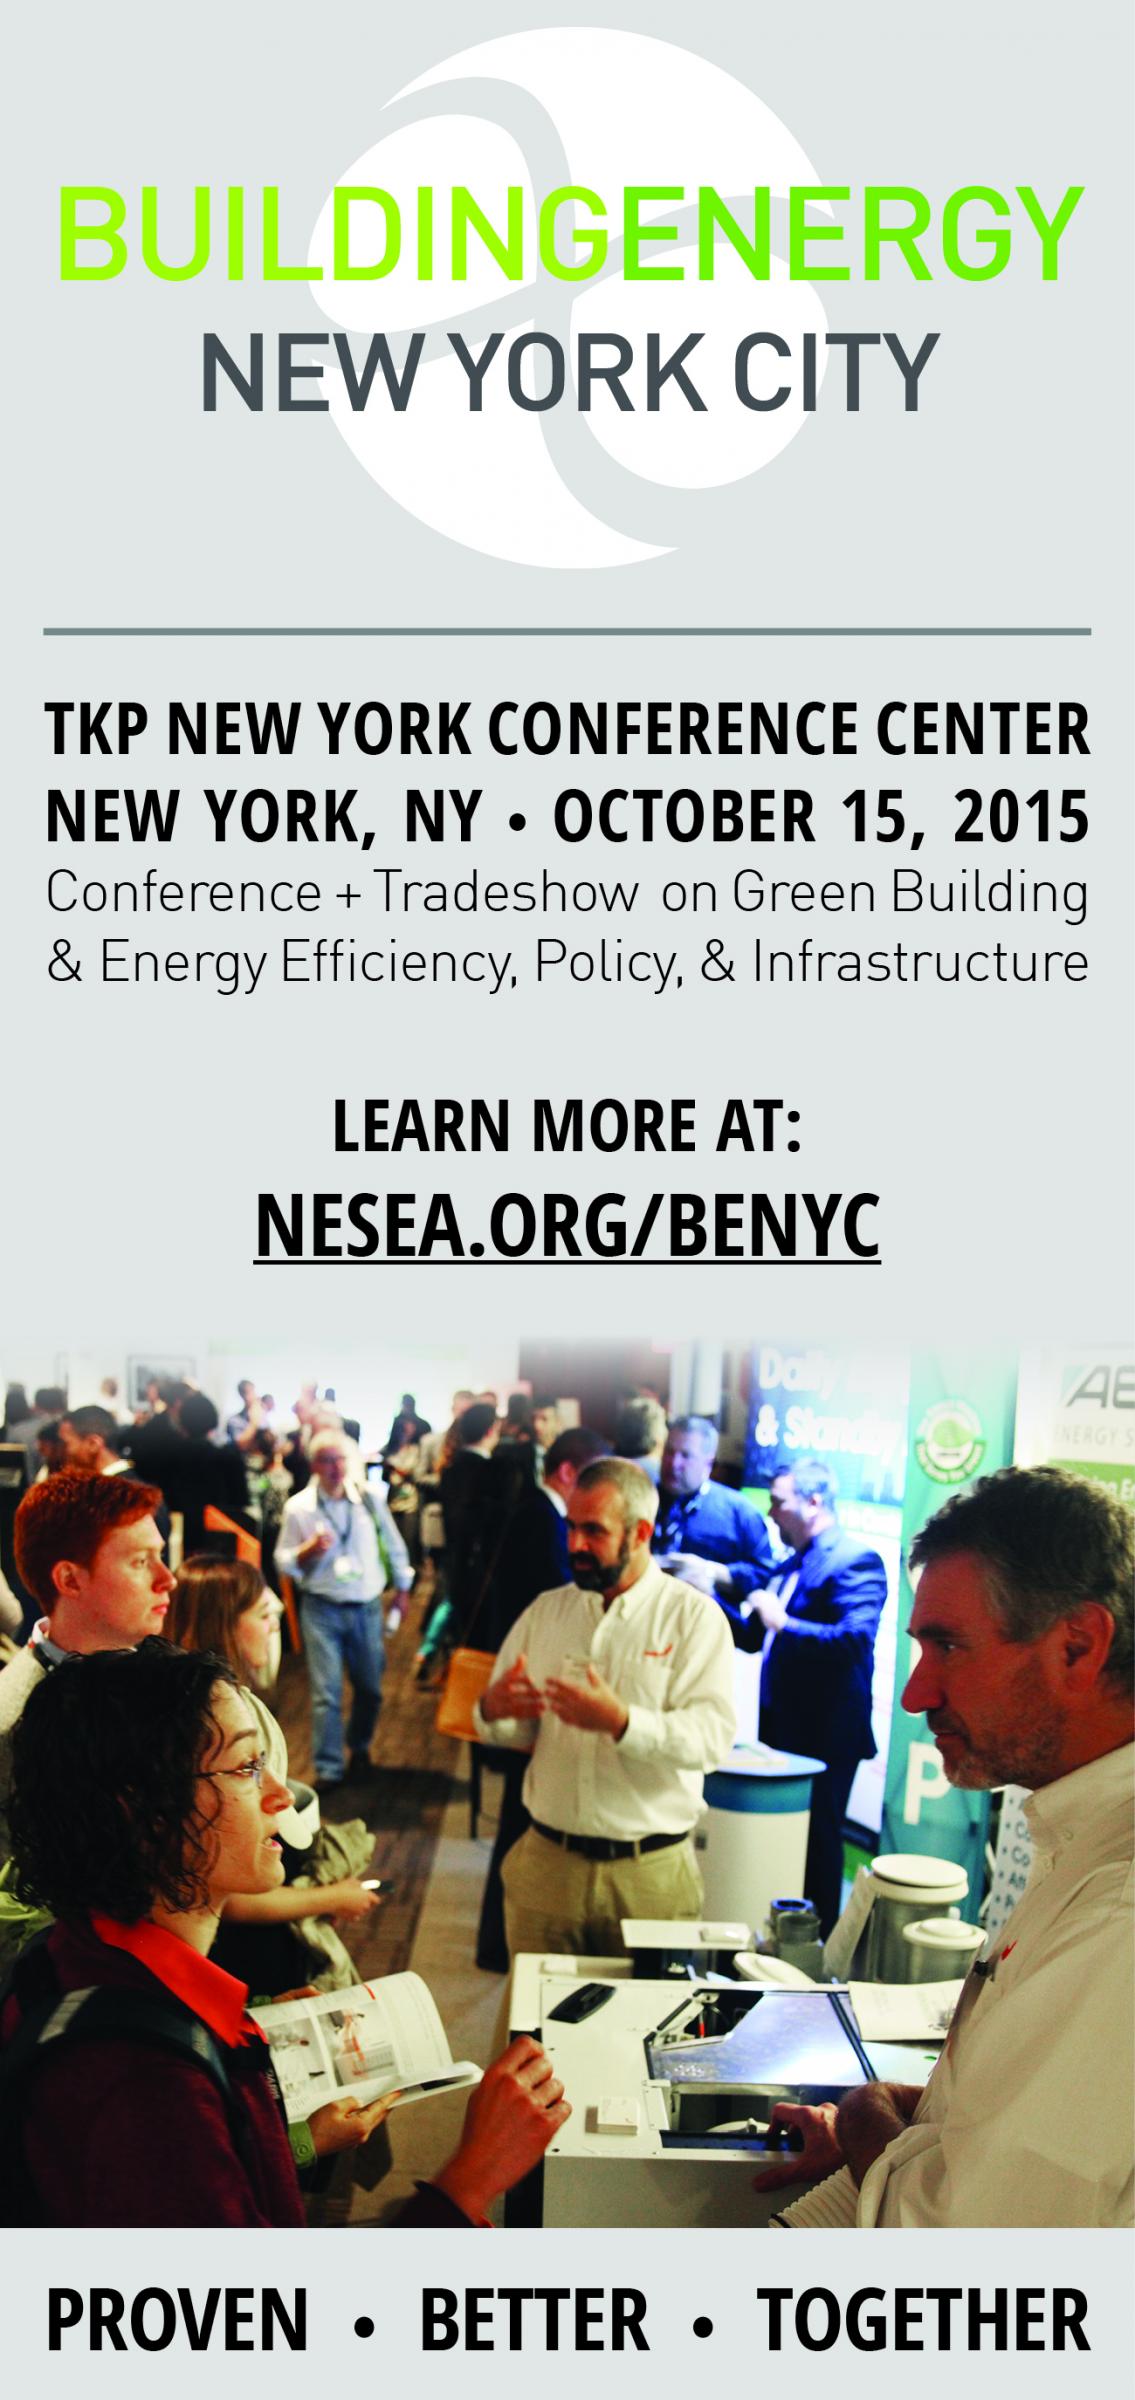 Attend BuildingEnergy NYC 15 Oct. 15th in New York City